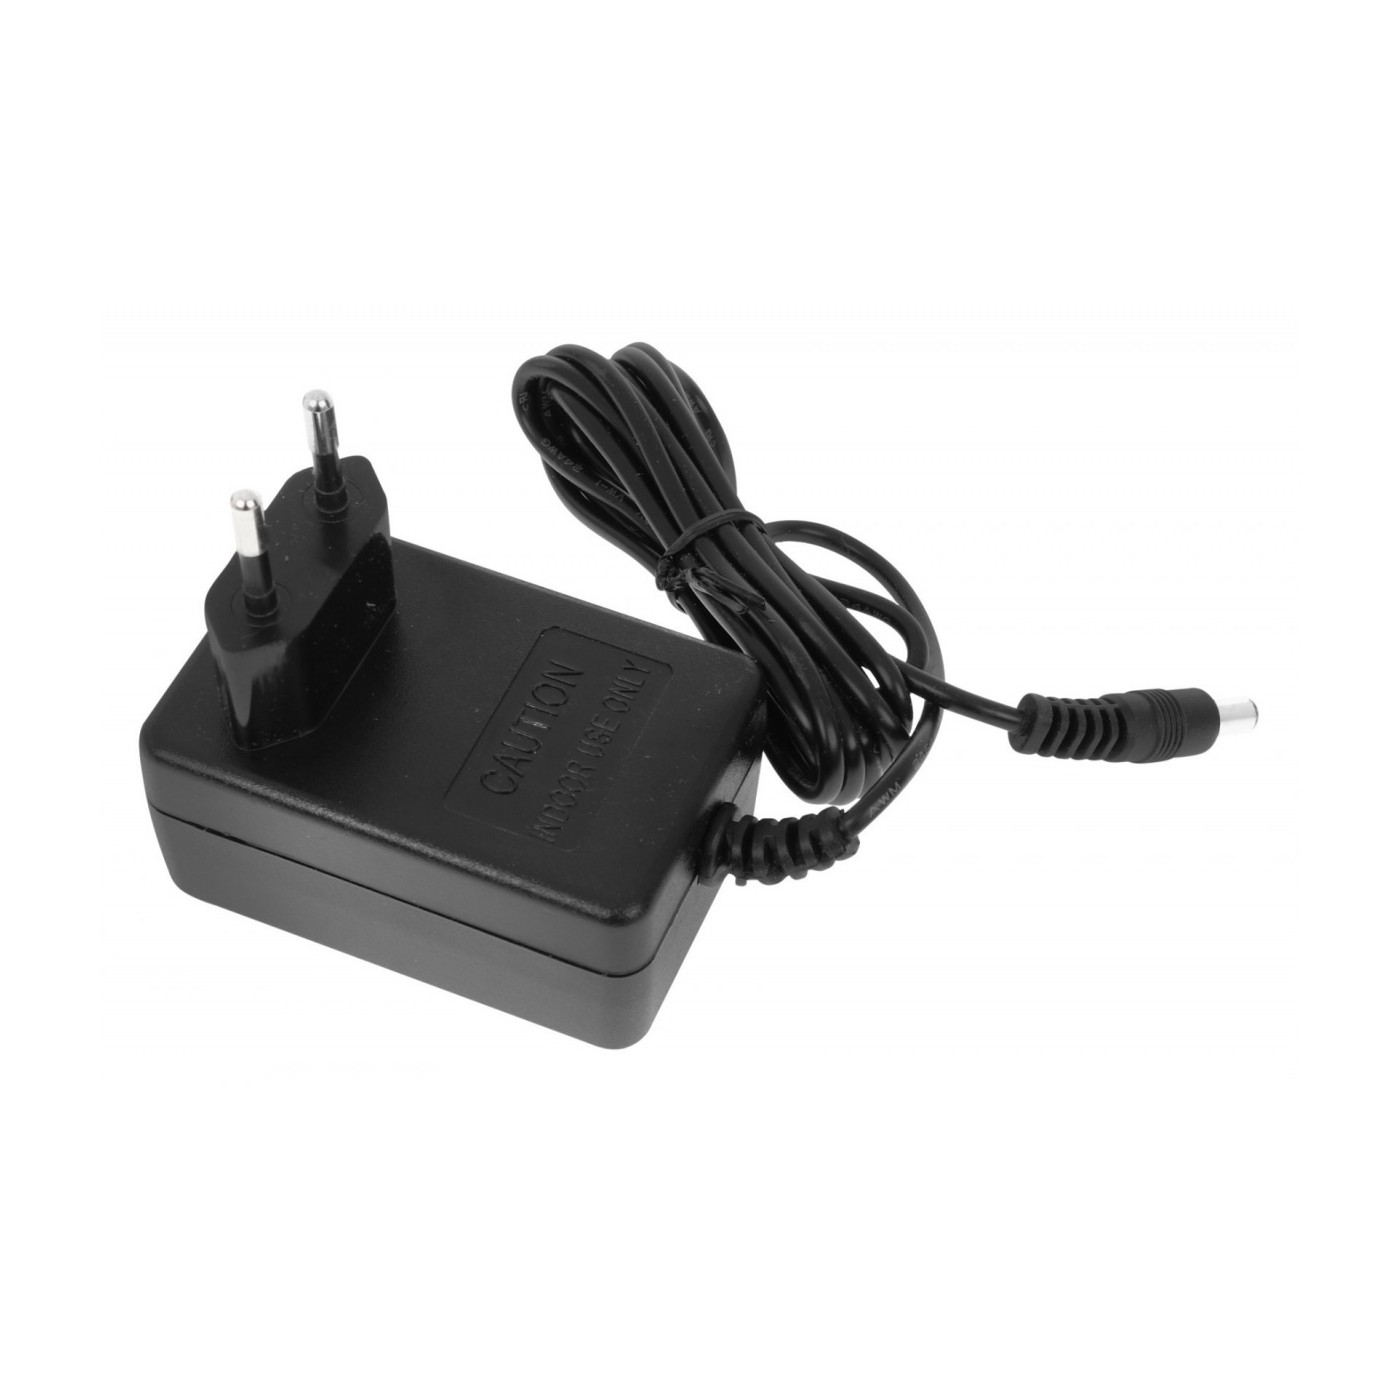 Charger with light 24V500MA